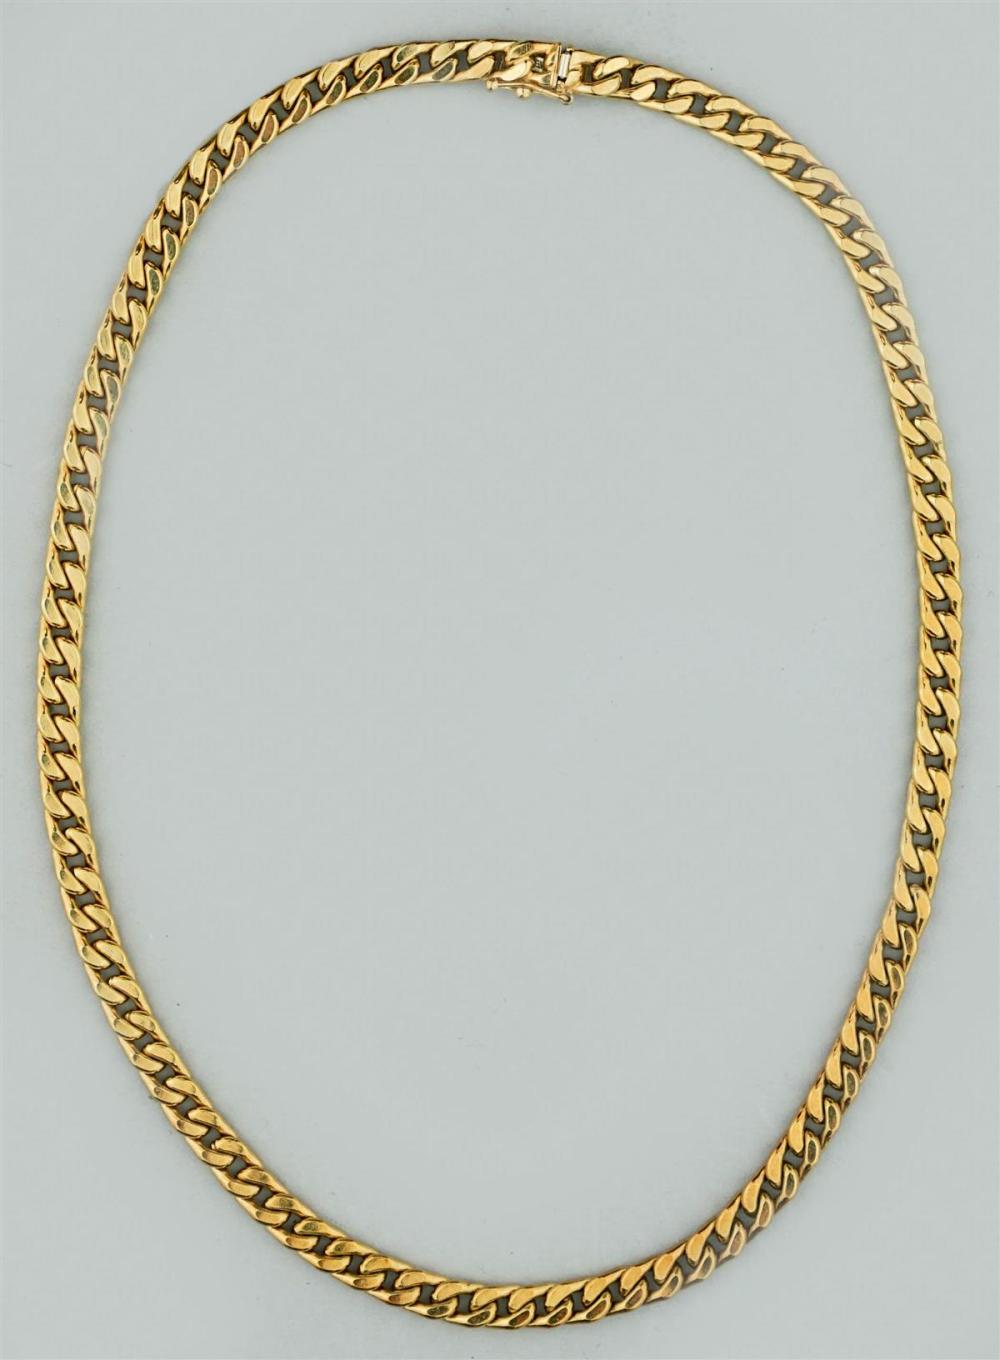 14K YELLOW GOLD 16 INCH CURB LINK 3137f5